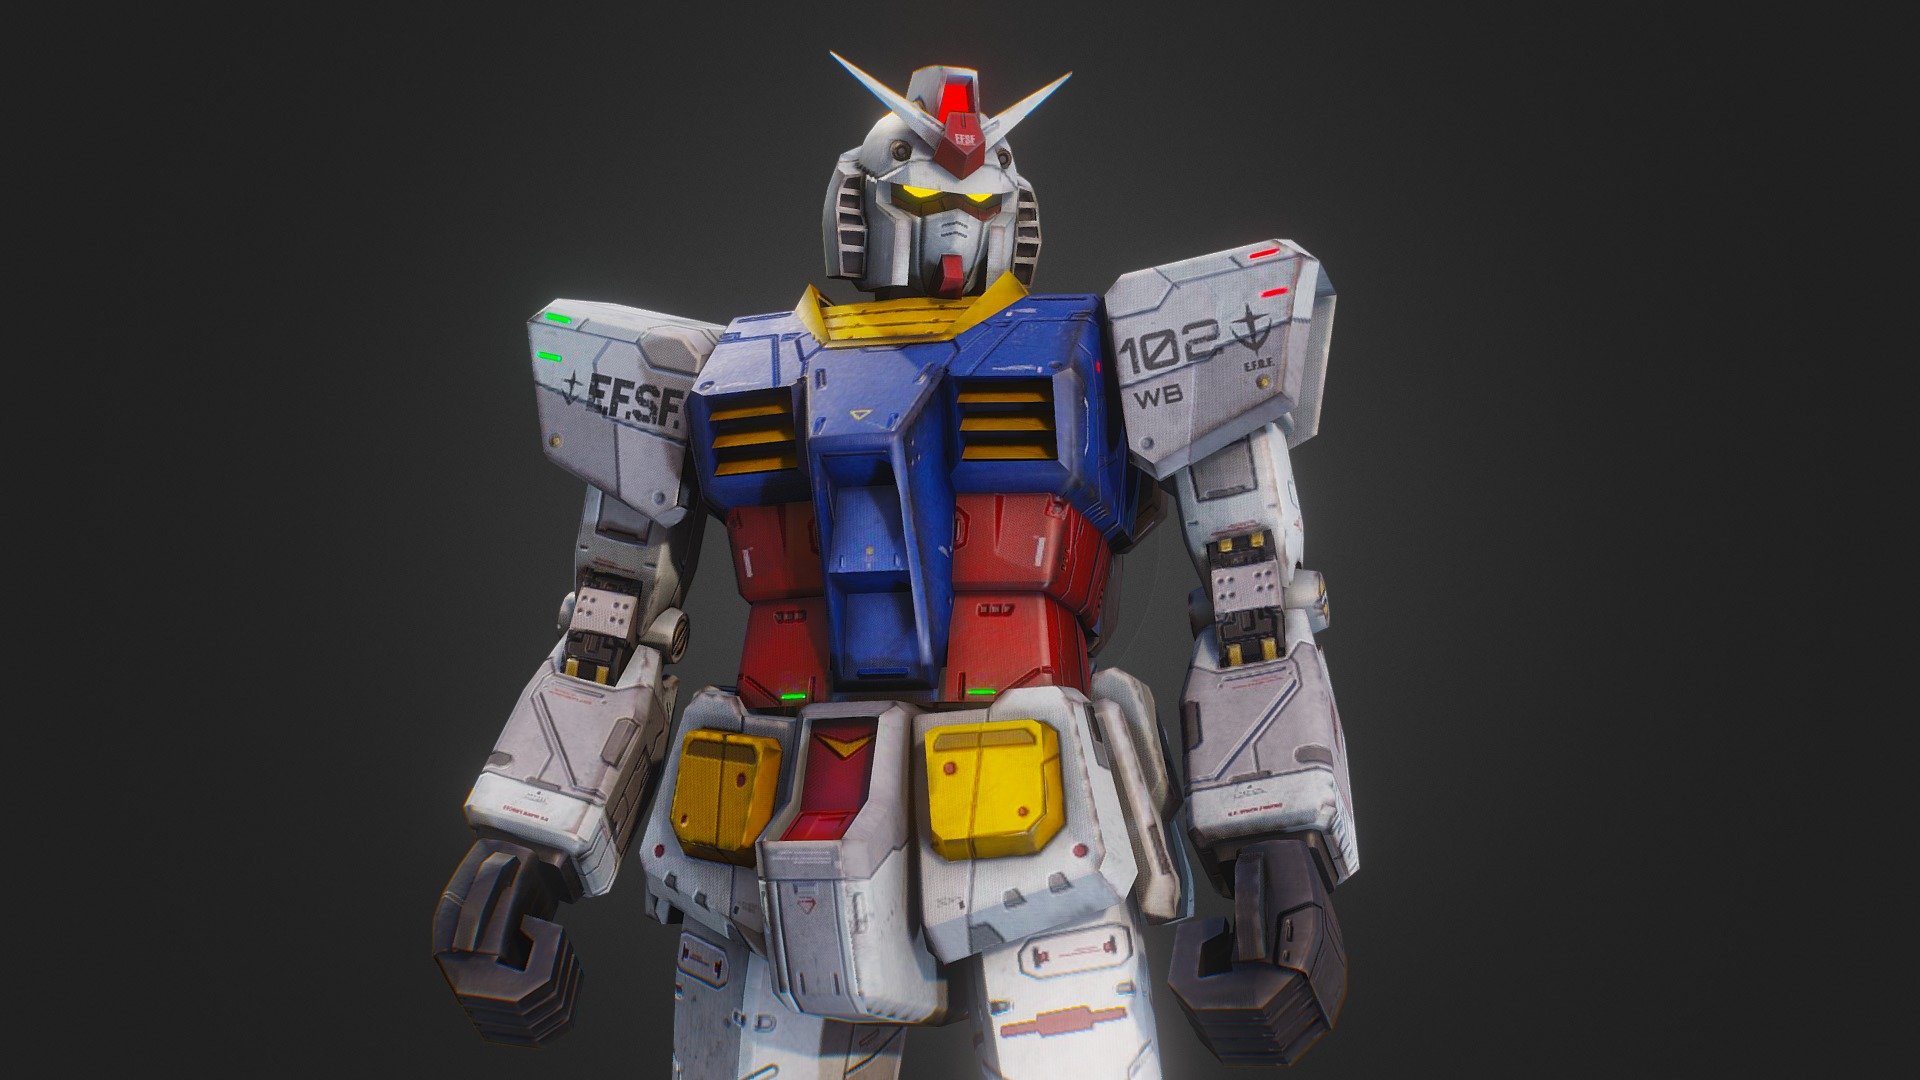 This model was made for One Year War mod of Hearts of Iron IV.

Our Mod Steam Home Page

https://steamcommunity.com/sharedfiles/filedetails/?id=2064985570 - RX-78 Gundam - 3D model by One Year War Mod (@hoi4oneyearwar) 3d model